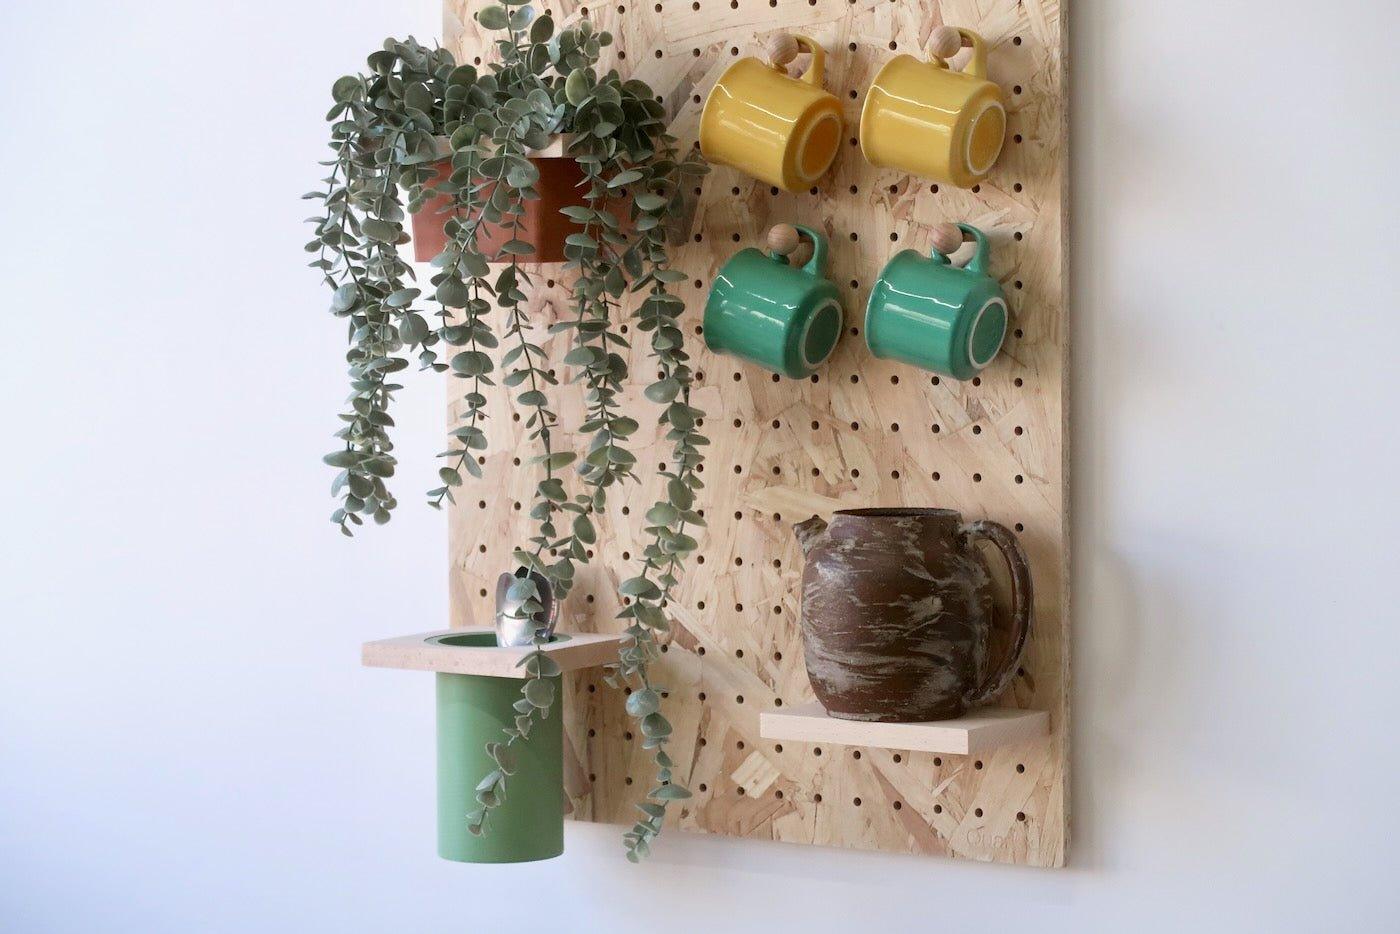 All-in-one: the 96 x 48 cm Pegboard Kit + desk set: perfect for an